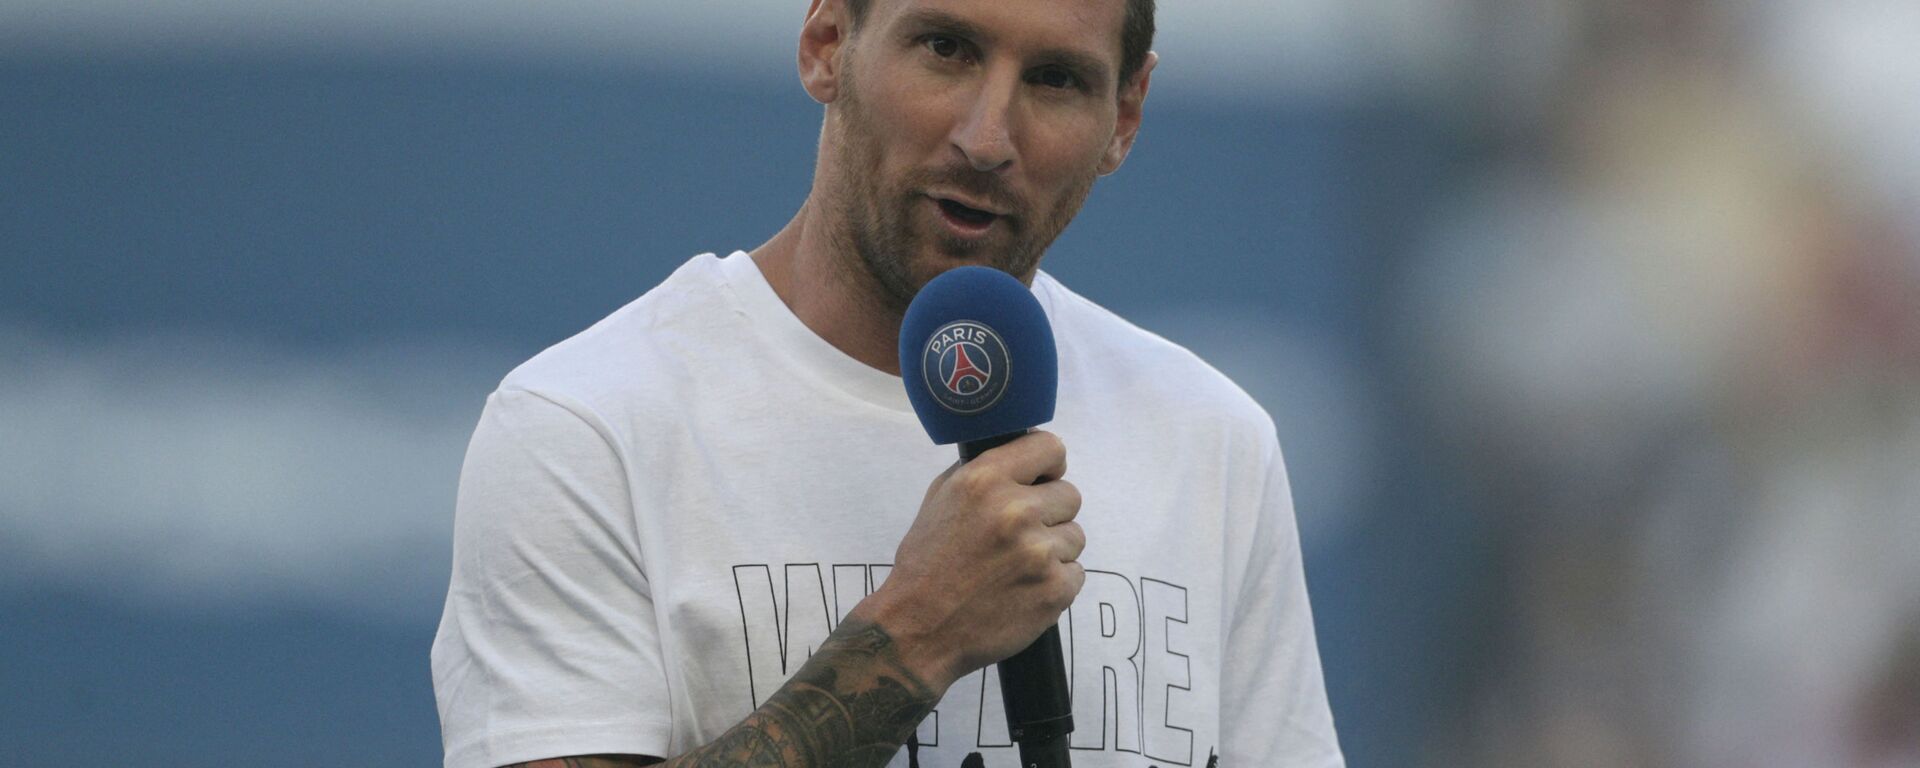 Paris Saint-Germain's Argentinian forward Lionel Messi speaks to the crowd as he is introduced during a presentation ceremony prior to the French L1 football match between Paris Saint-Germain and Racing Club Strasbourg at the Parc des Princes stadium in Paris on August 14, 2021. - Sputnik International, 1920, 20.08.2021